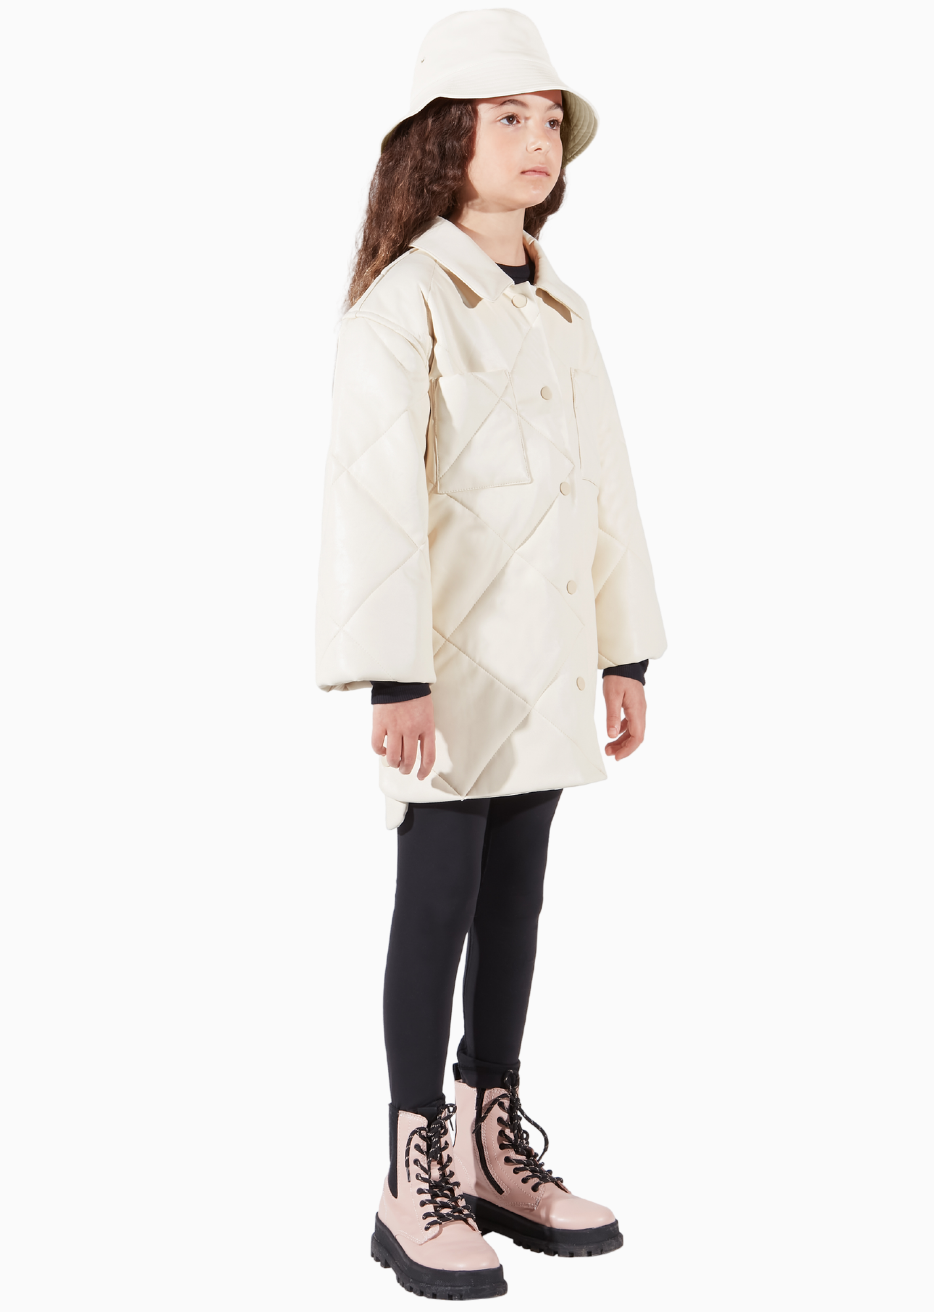 Charlie White Champagne Quilted Vegan Leather Shacket Kids Sustainable Spring Fashion